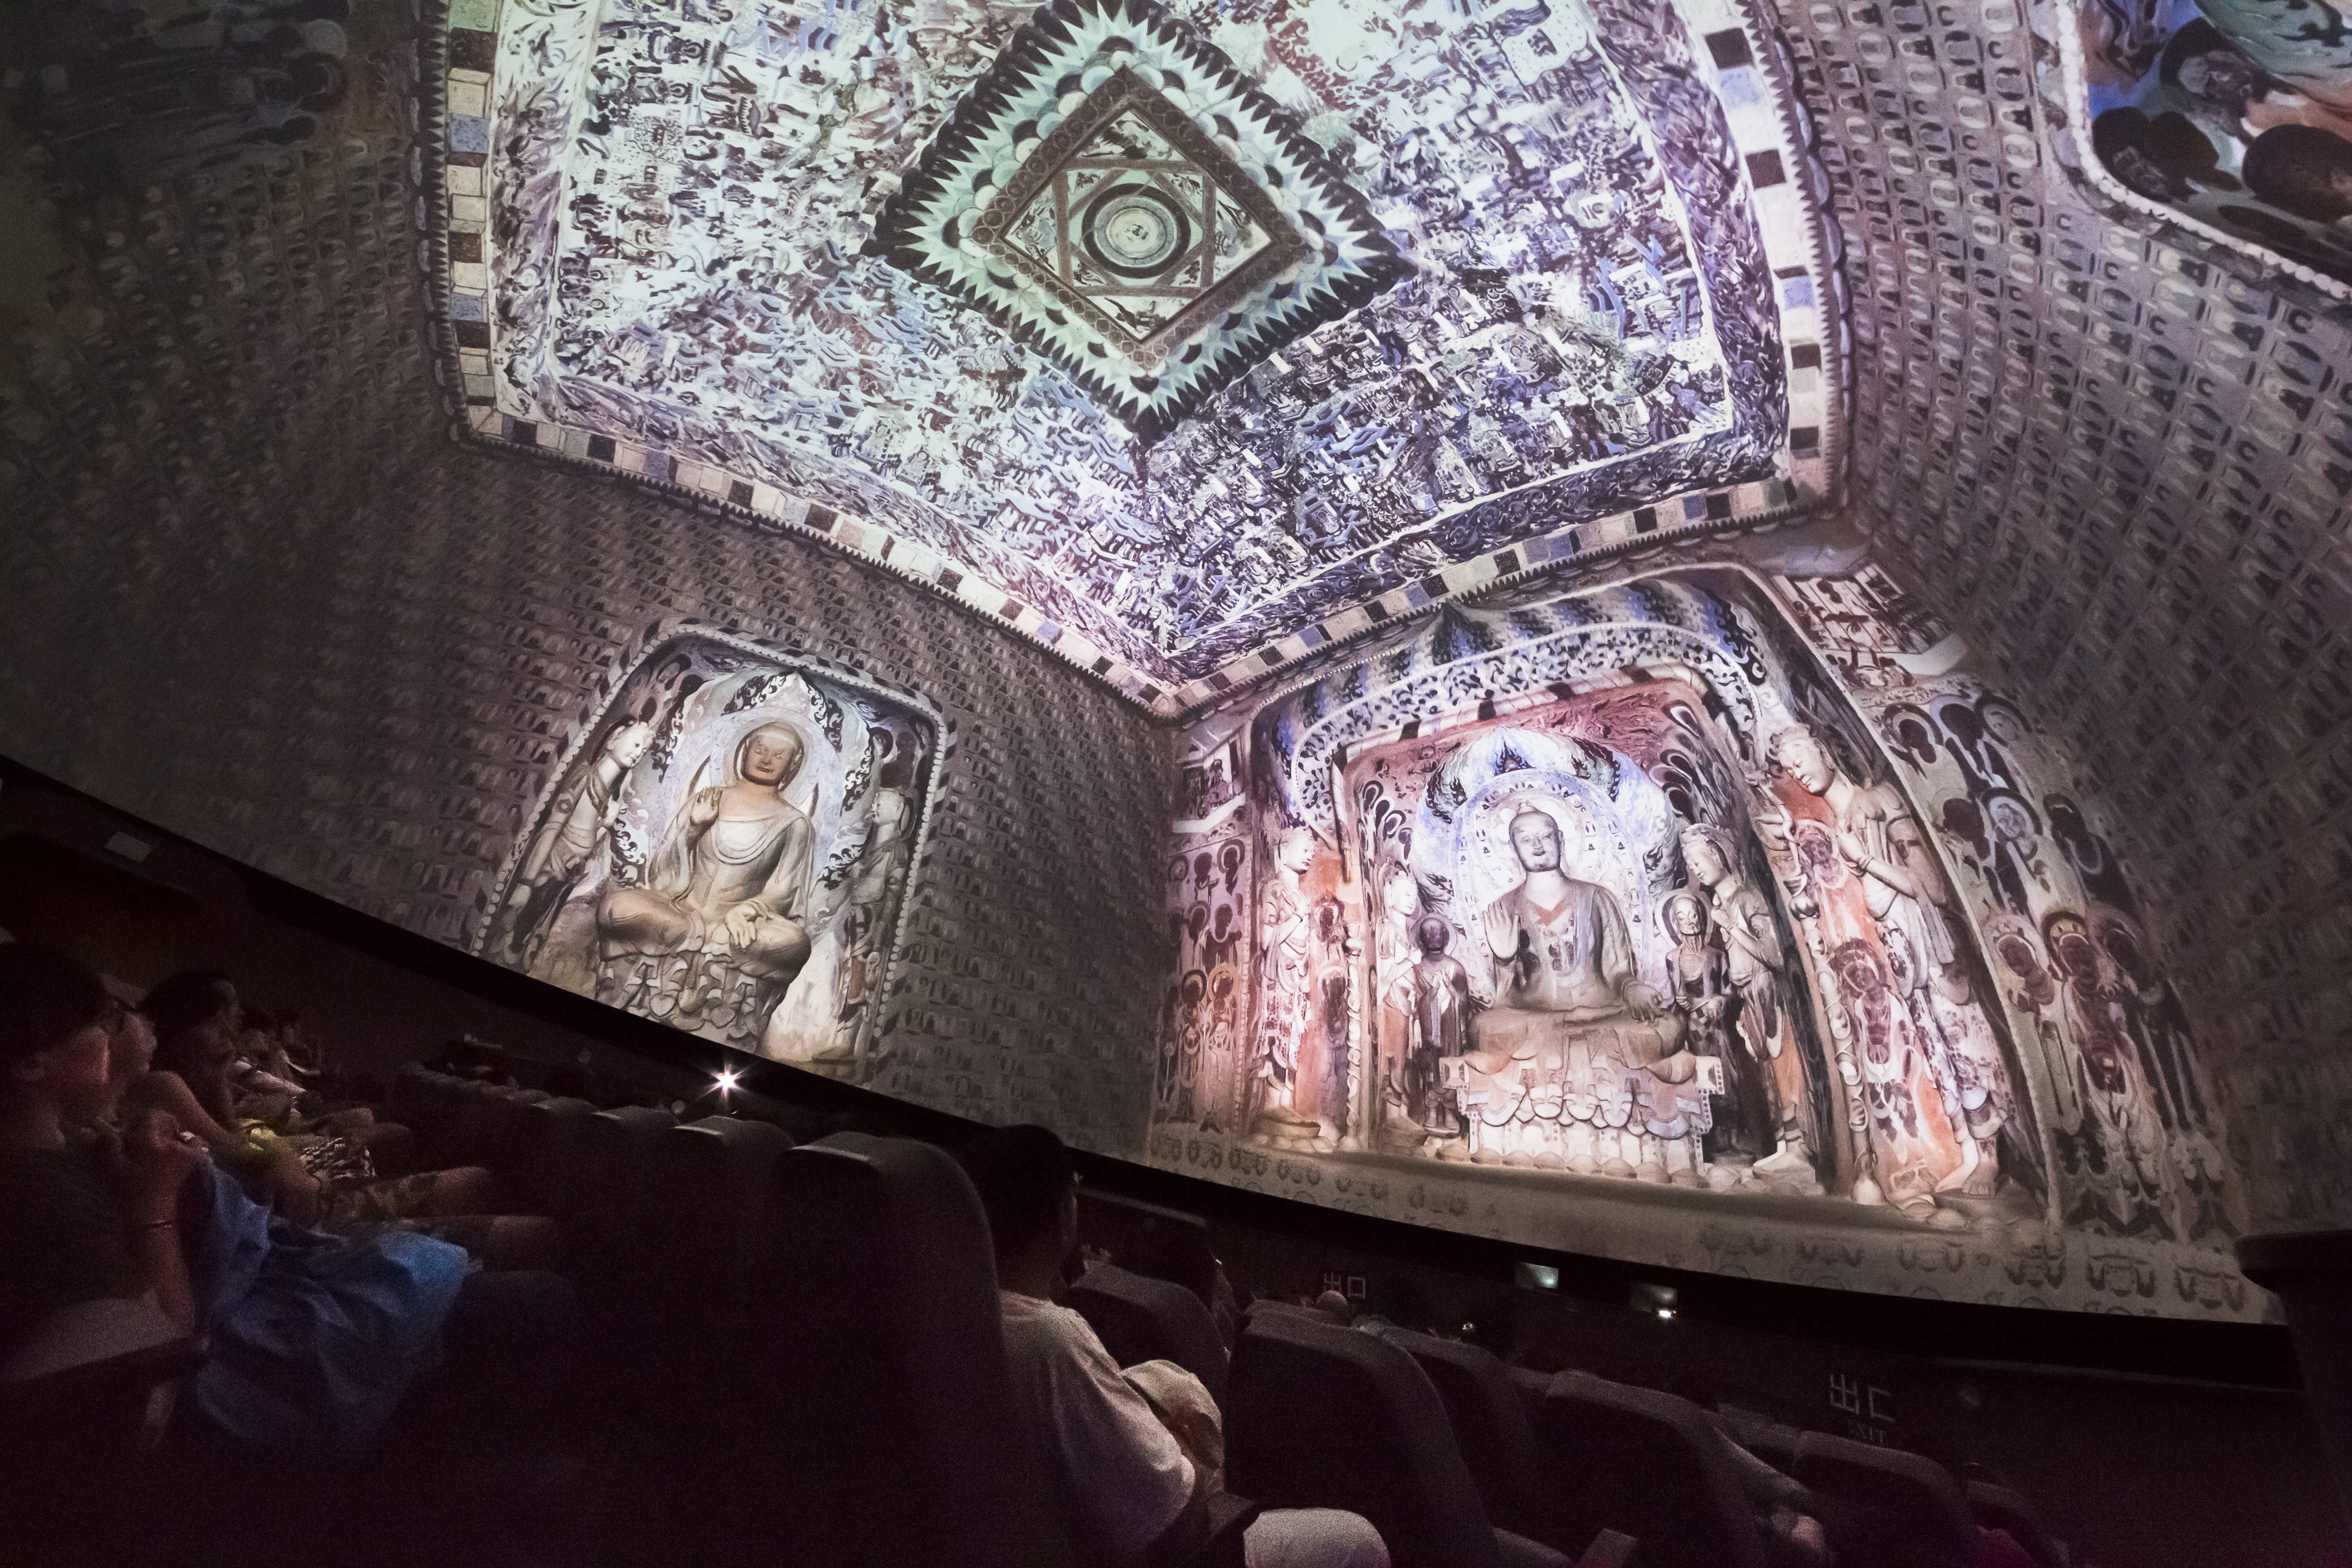 Visitors watch a full-dome digital film at the digital center in Dunhuang, Gansu Province. /Provided by Dunhuang Academy